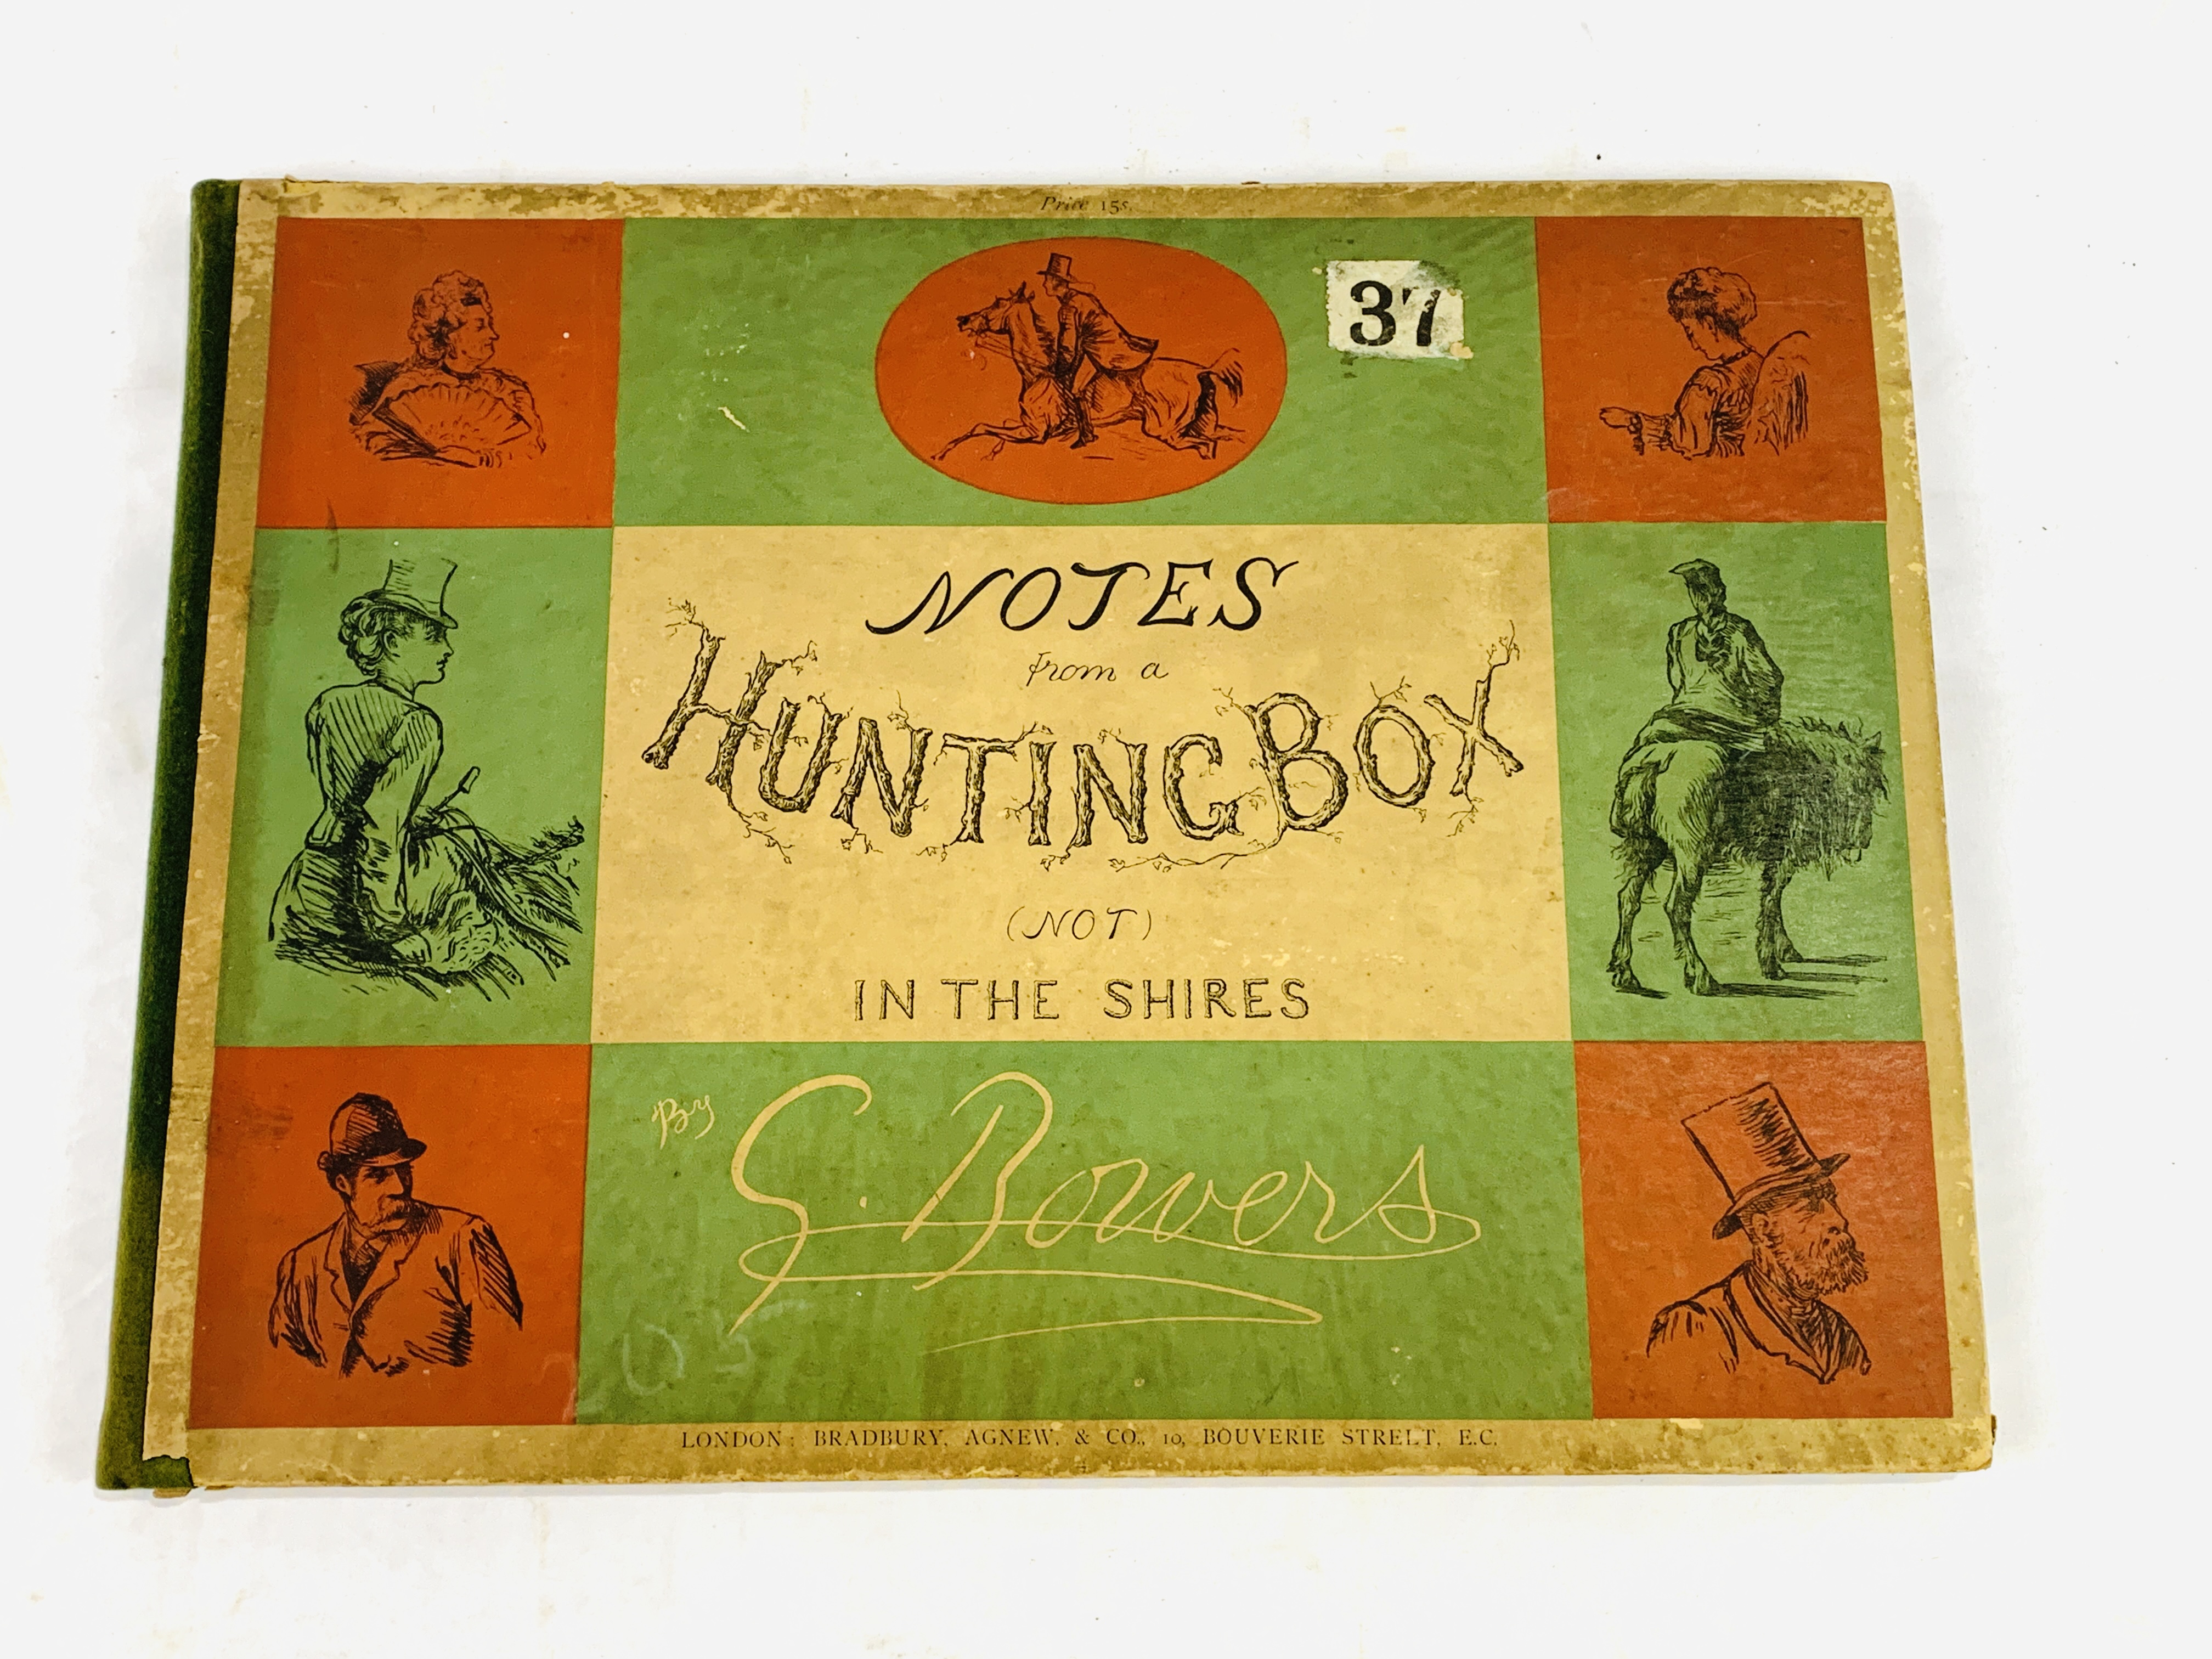 "Notes from a Hunting Box (not) In the Shires", by G Bowers